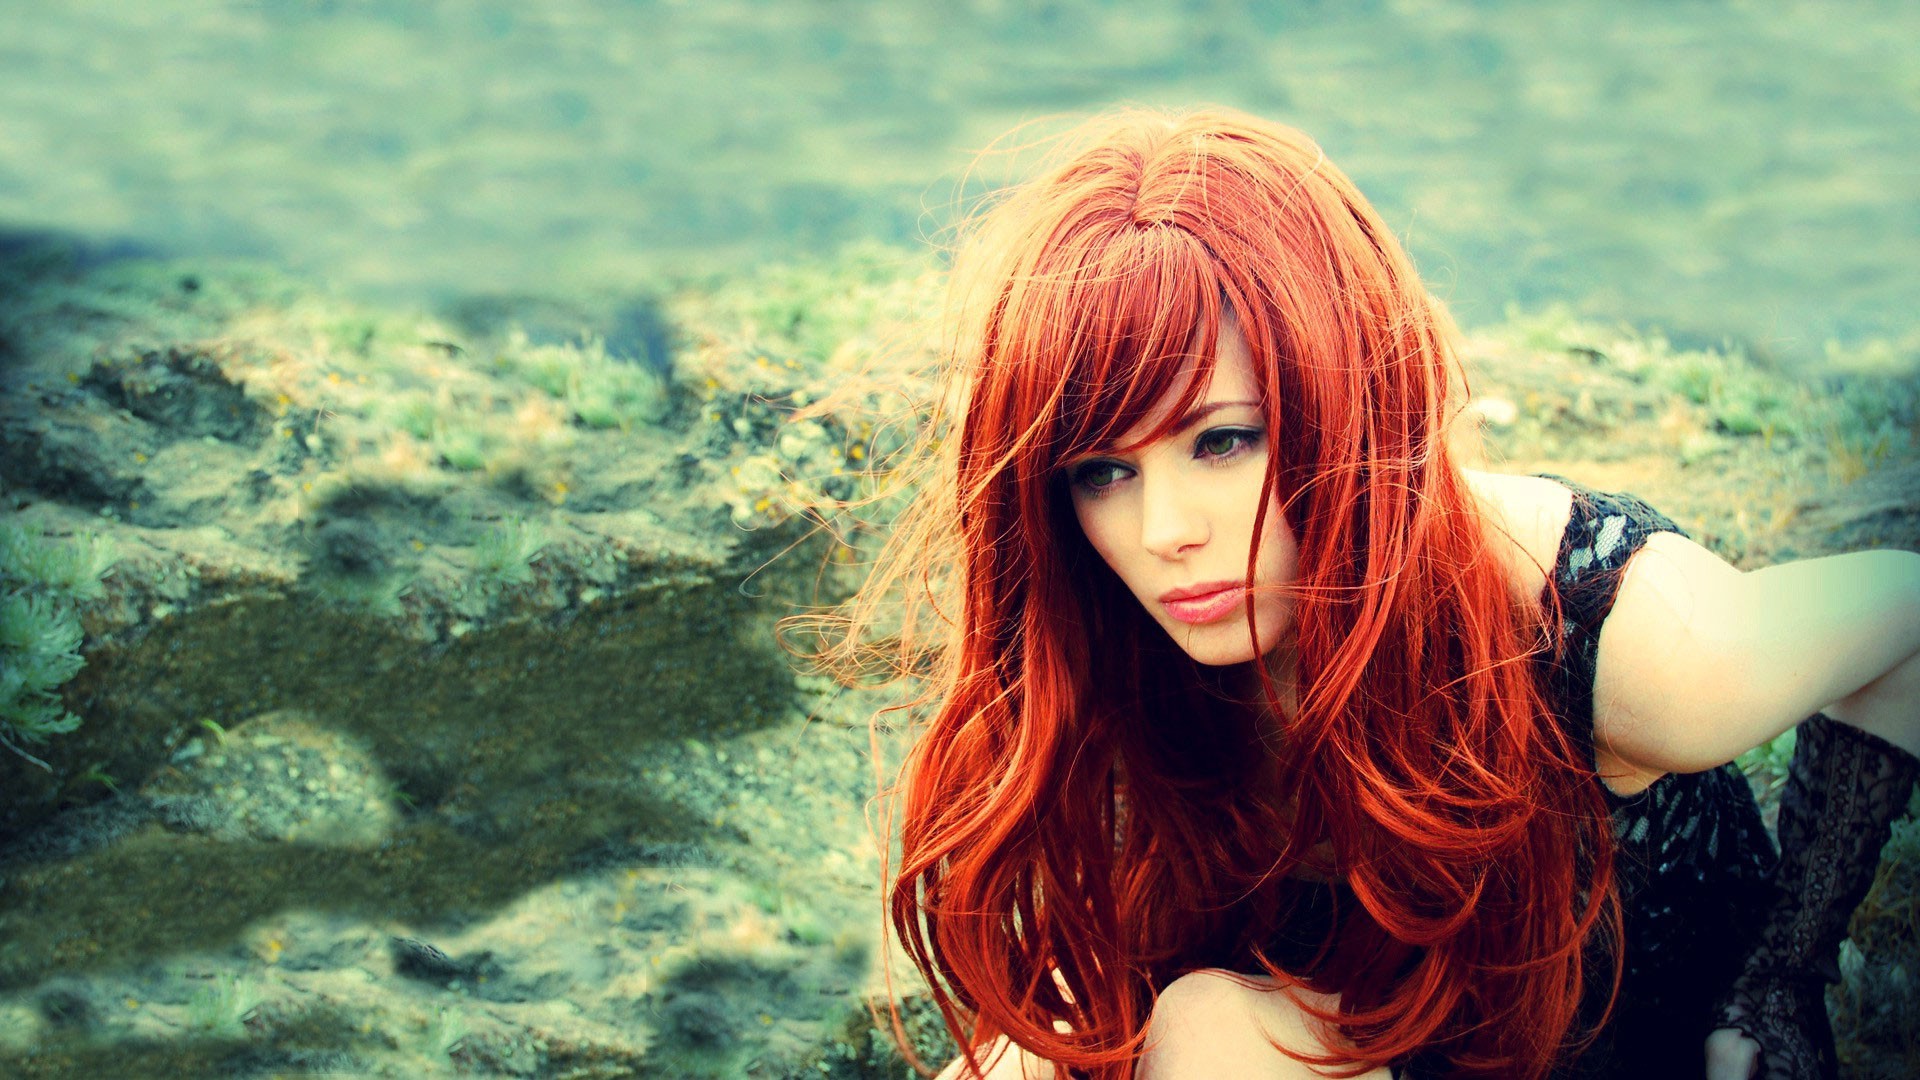 Download hd wallpapers of 74429-redhead. 